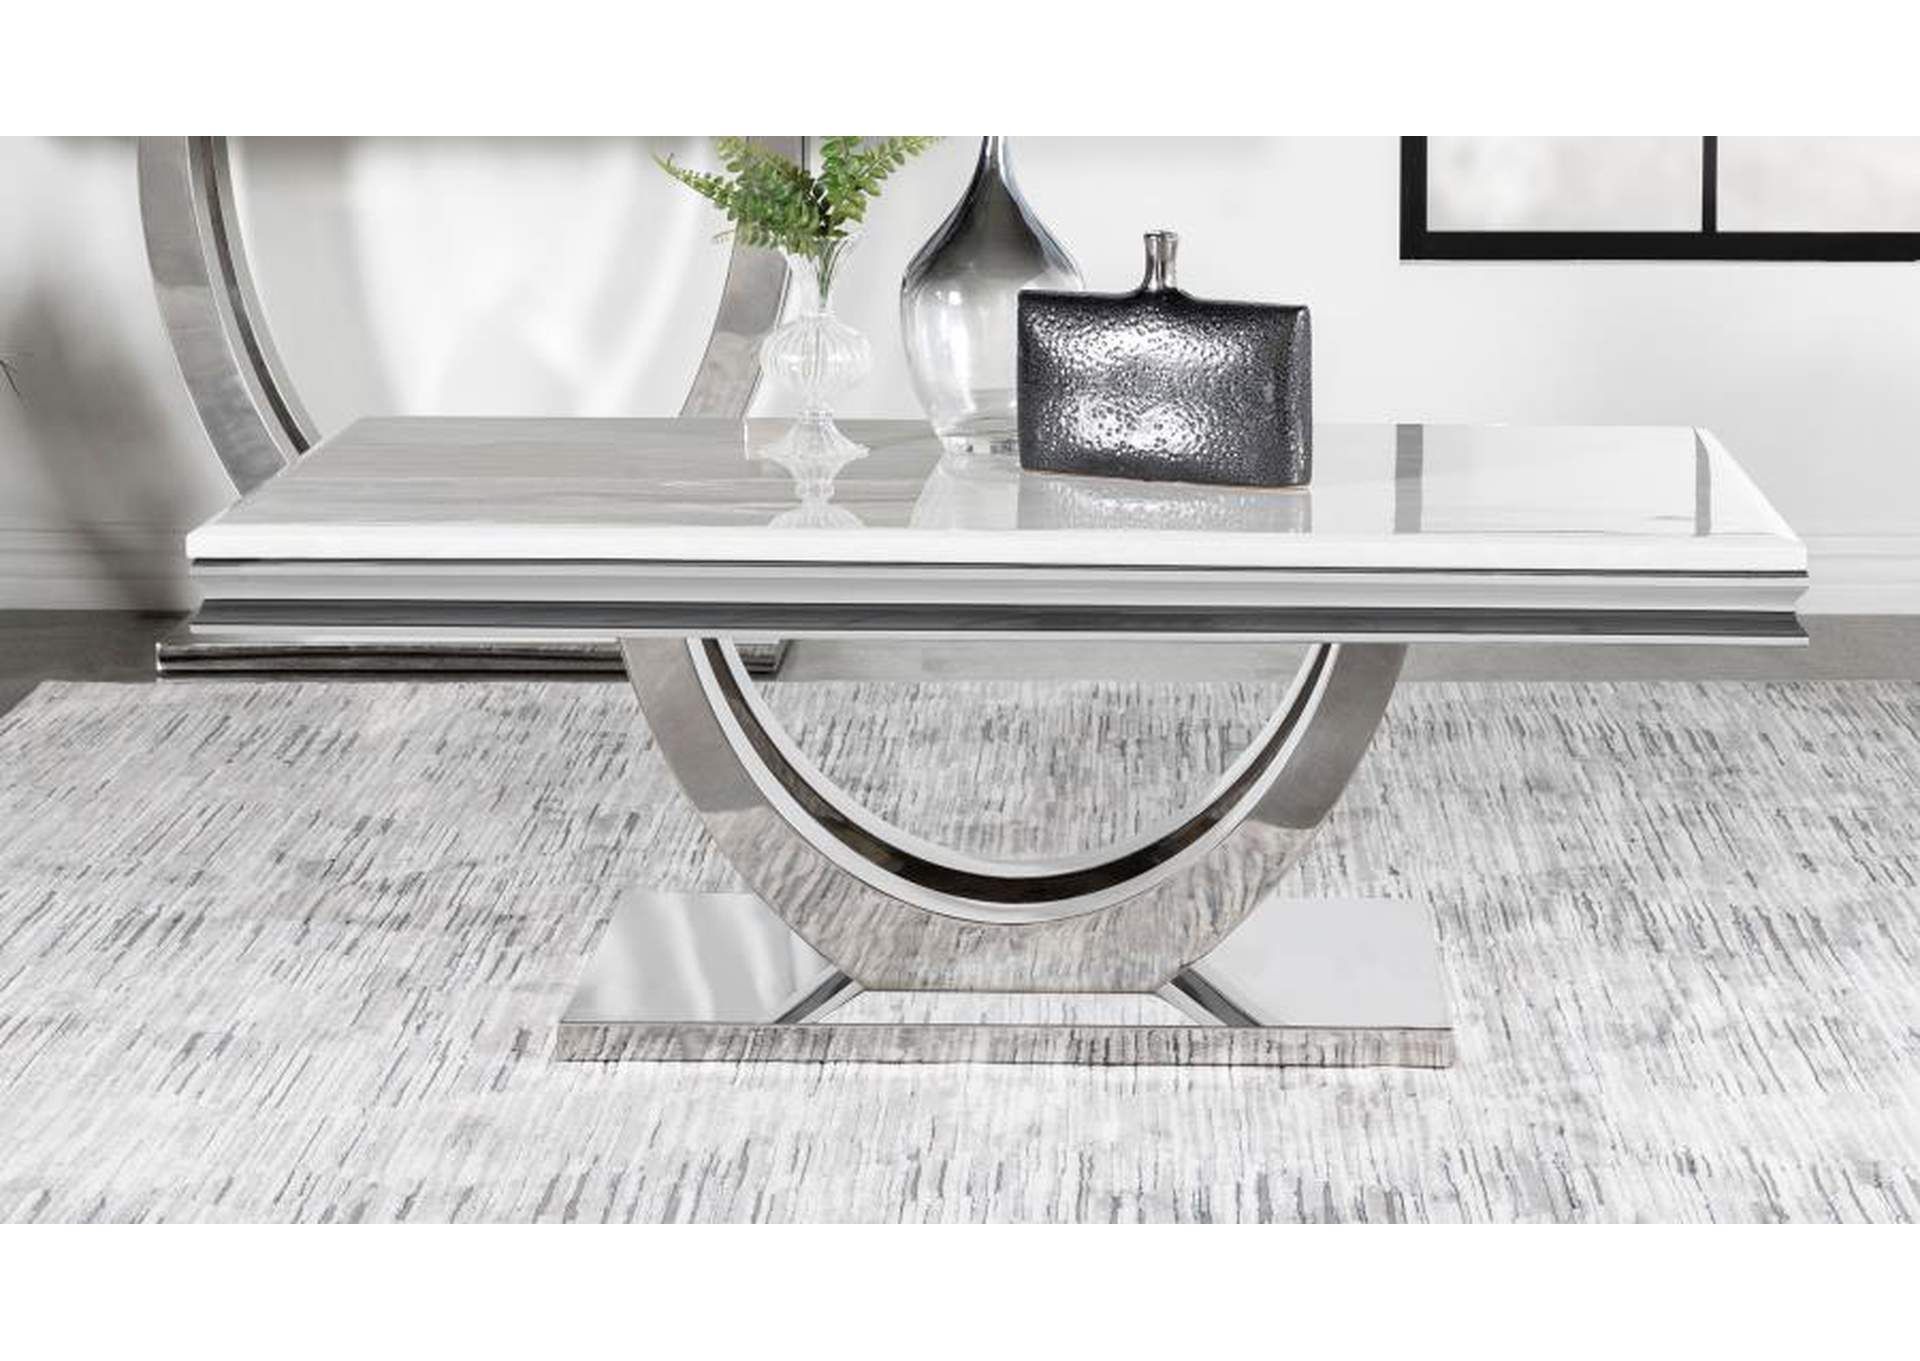 Adabella U Base Rectangle Coffee Table White And Chrome Sweet Dreams  Bedding & Furniture Throughout Rectangular Coffee Tables With Pedestal Bases (View 11 of 15)